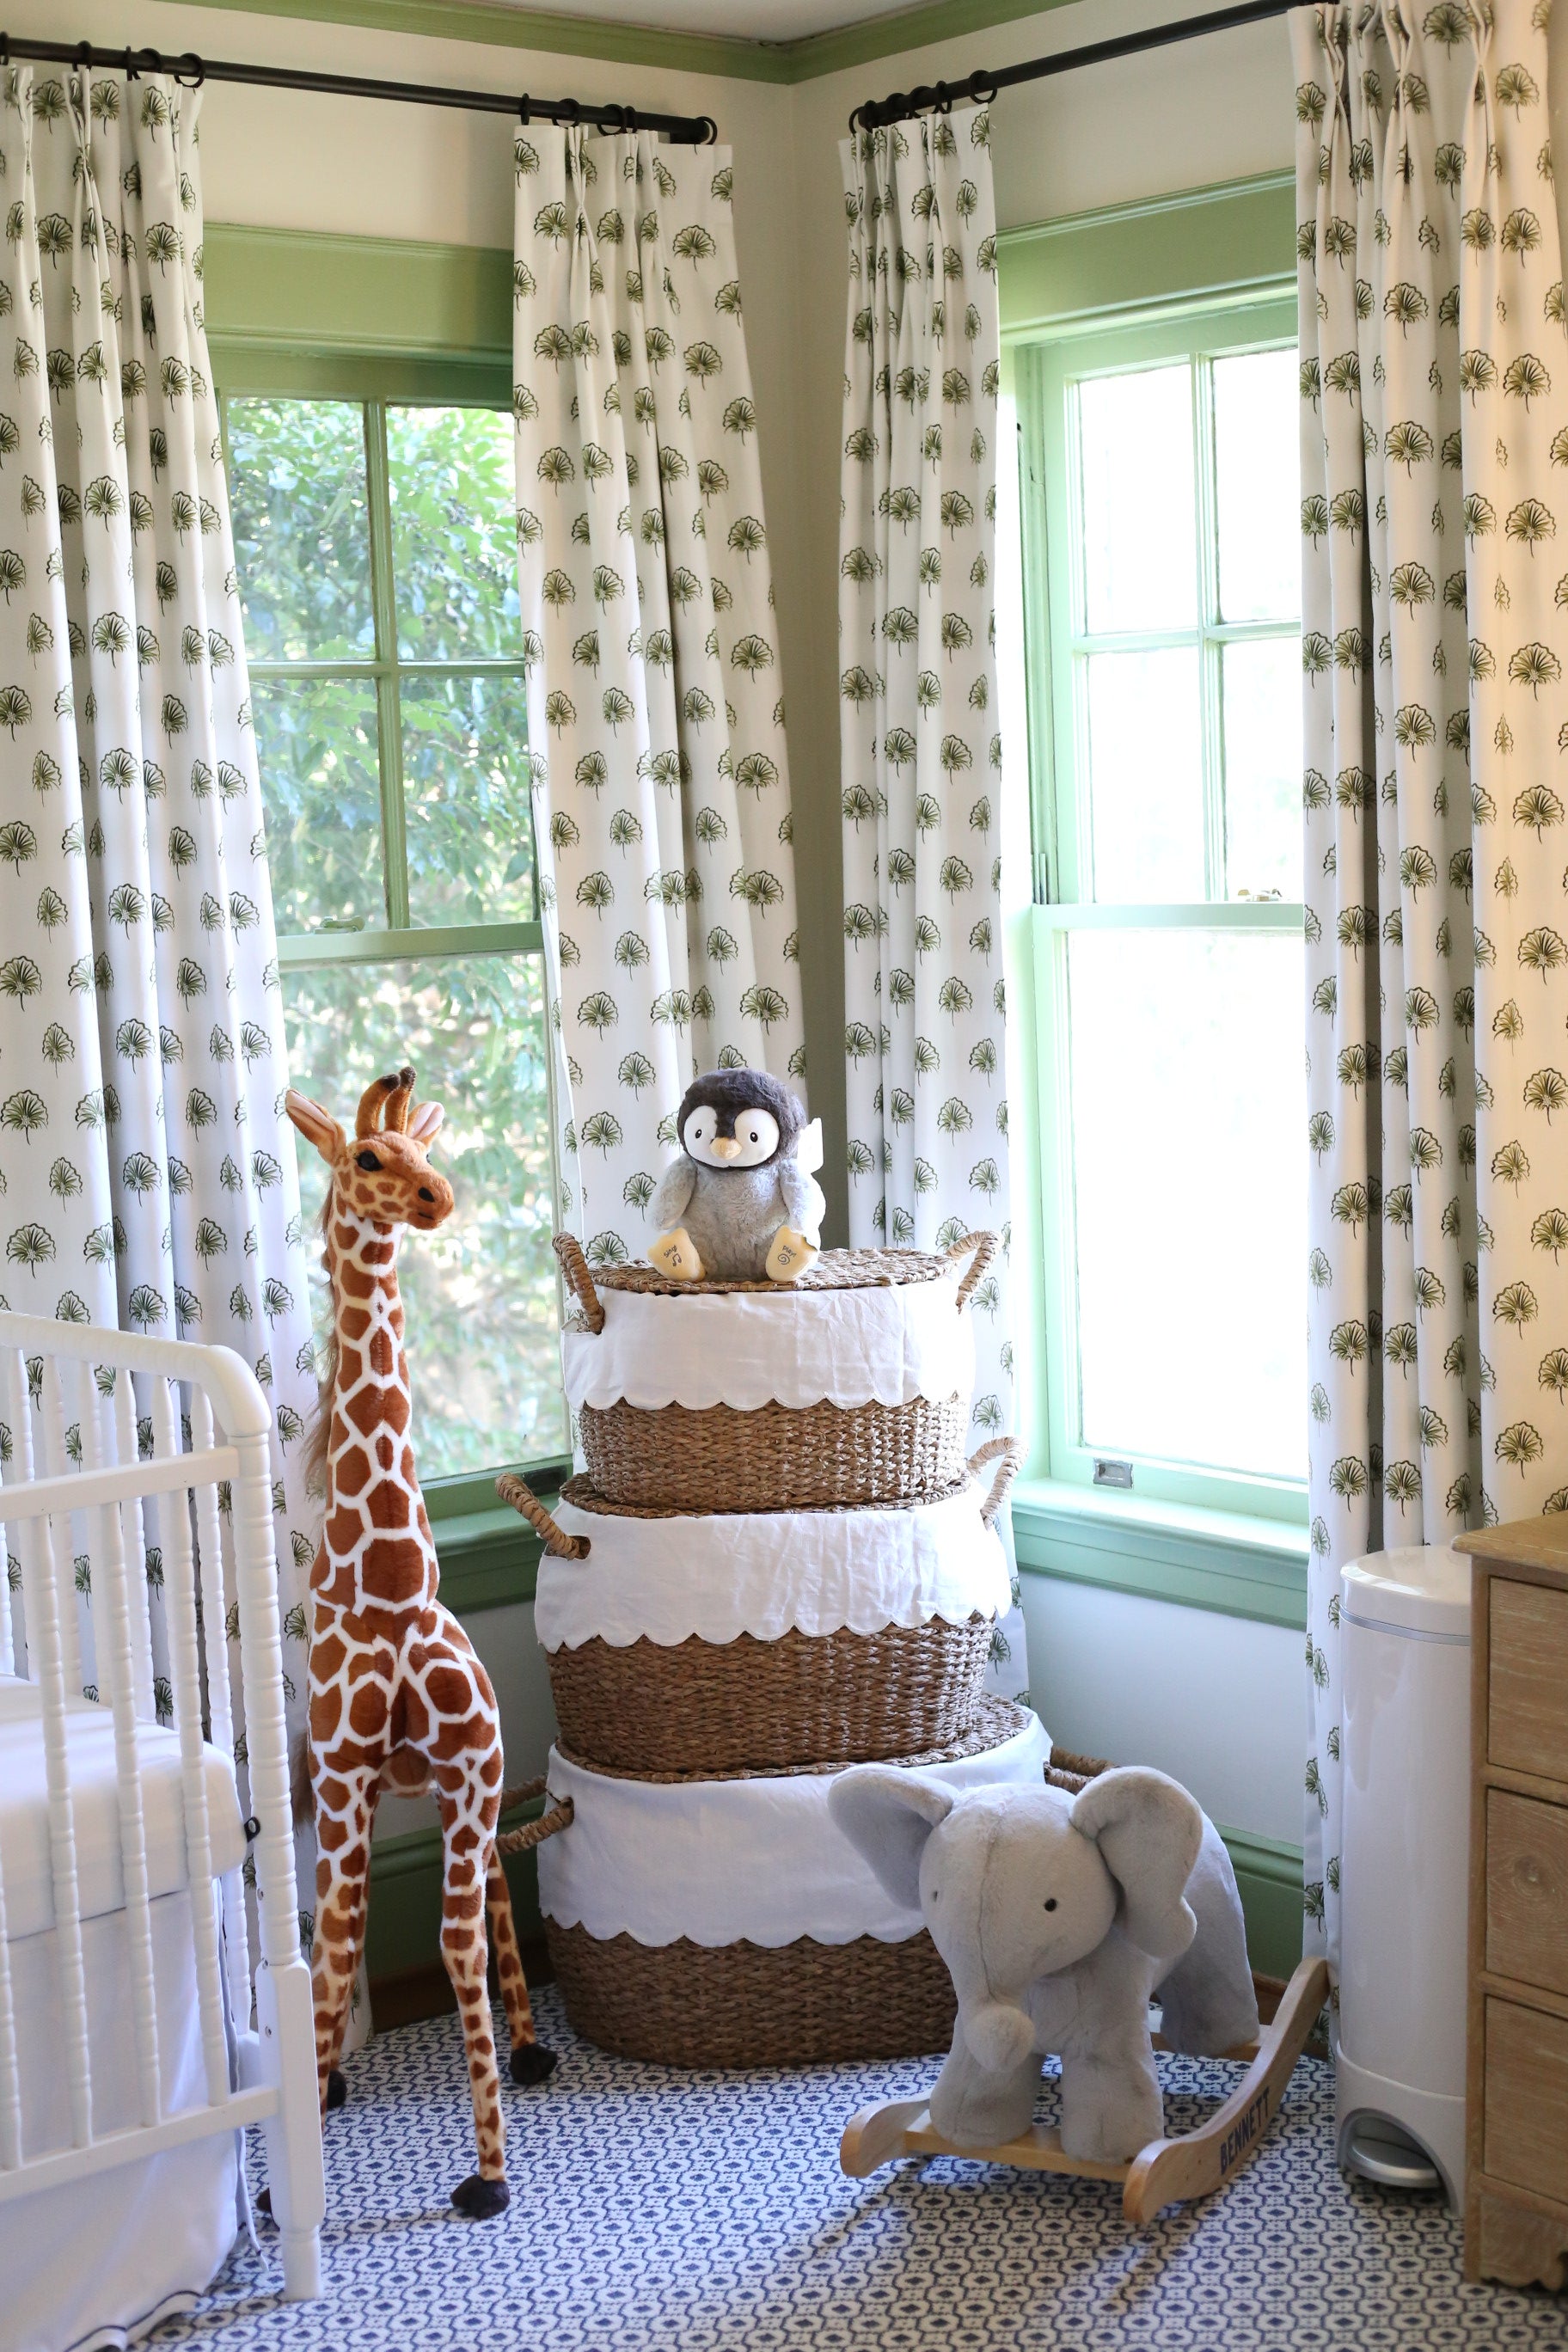 Green floral custom curtains hanging on a rod in a green painted nursery styled with a stuffed animal giraffe and rattan baskets